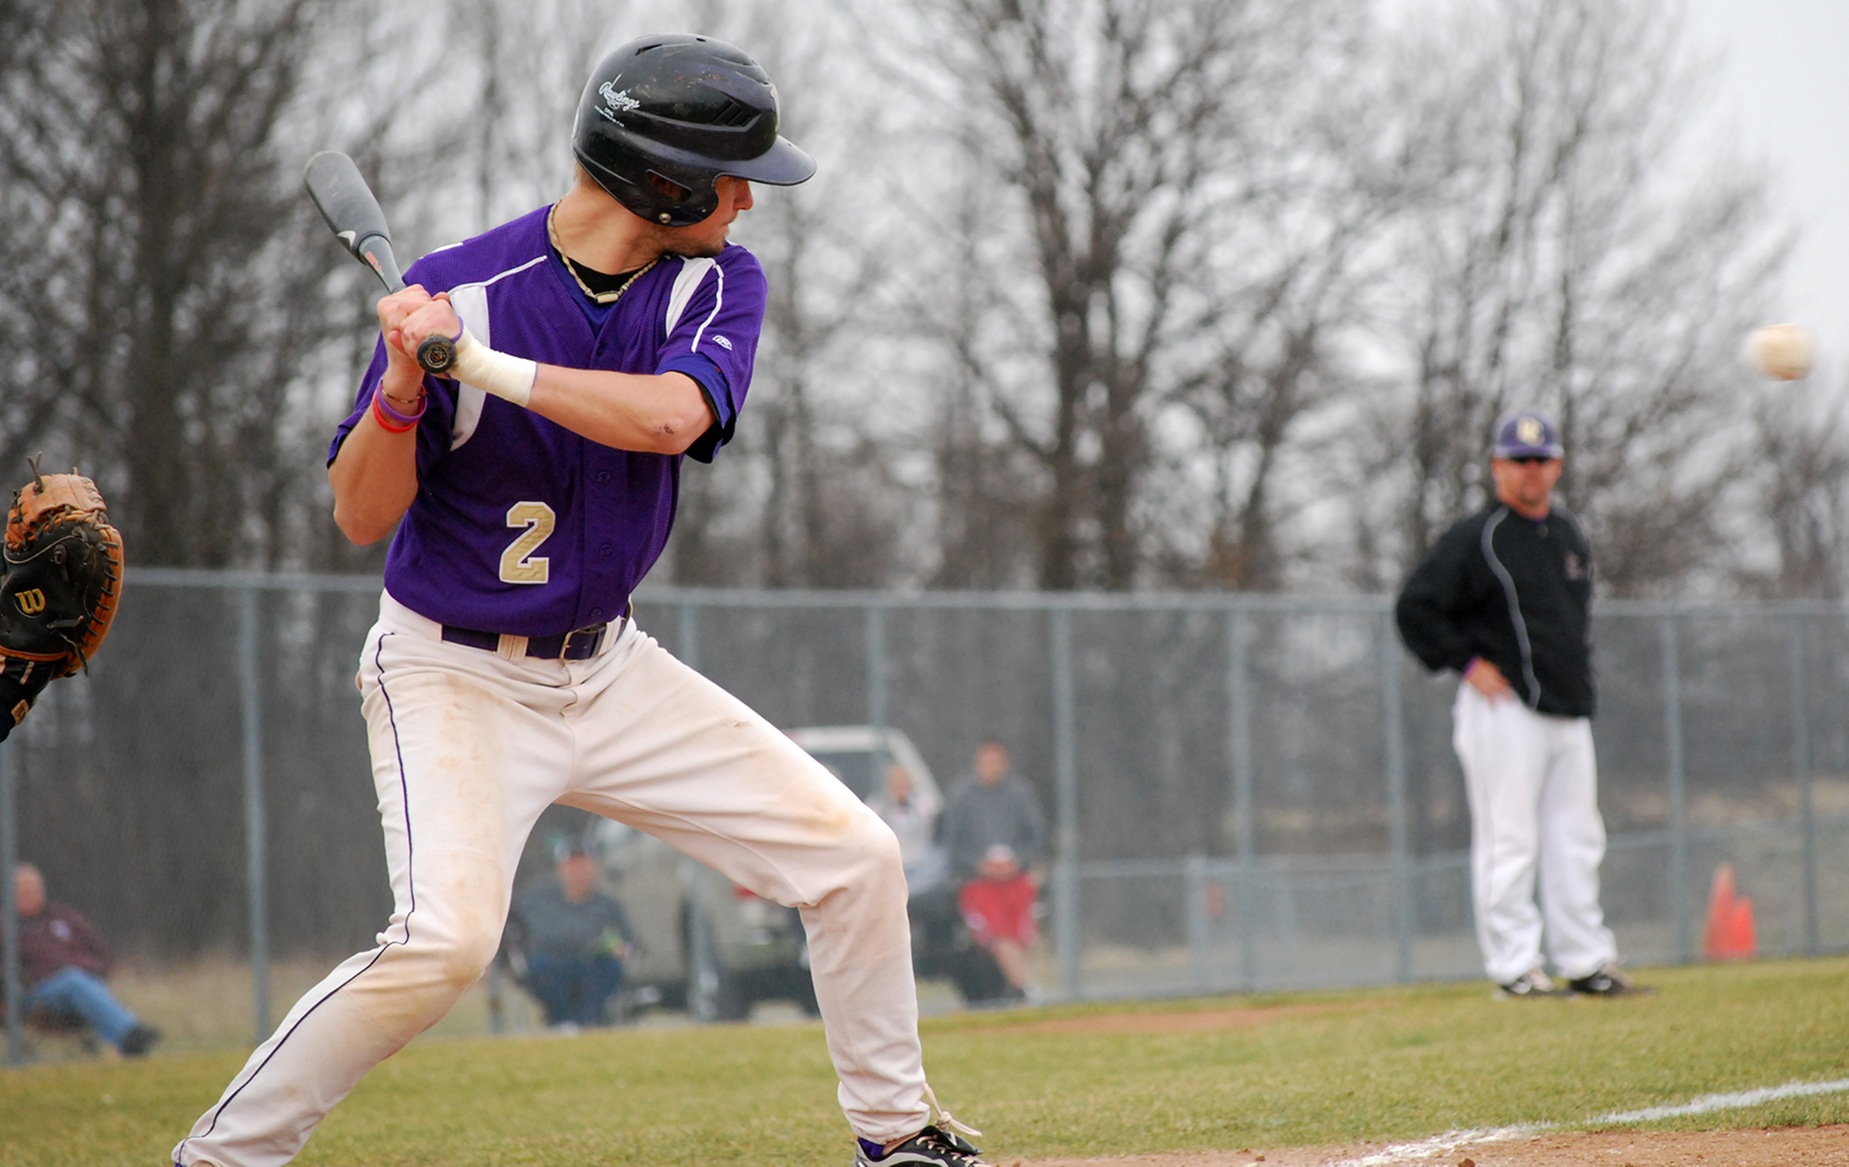 Ninth-Inning Rally Ends Short for DC Against Bluffton